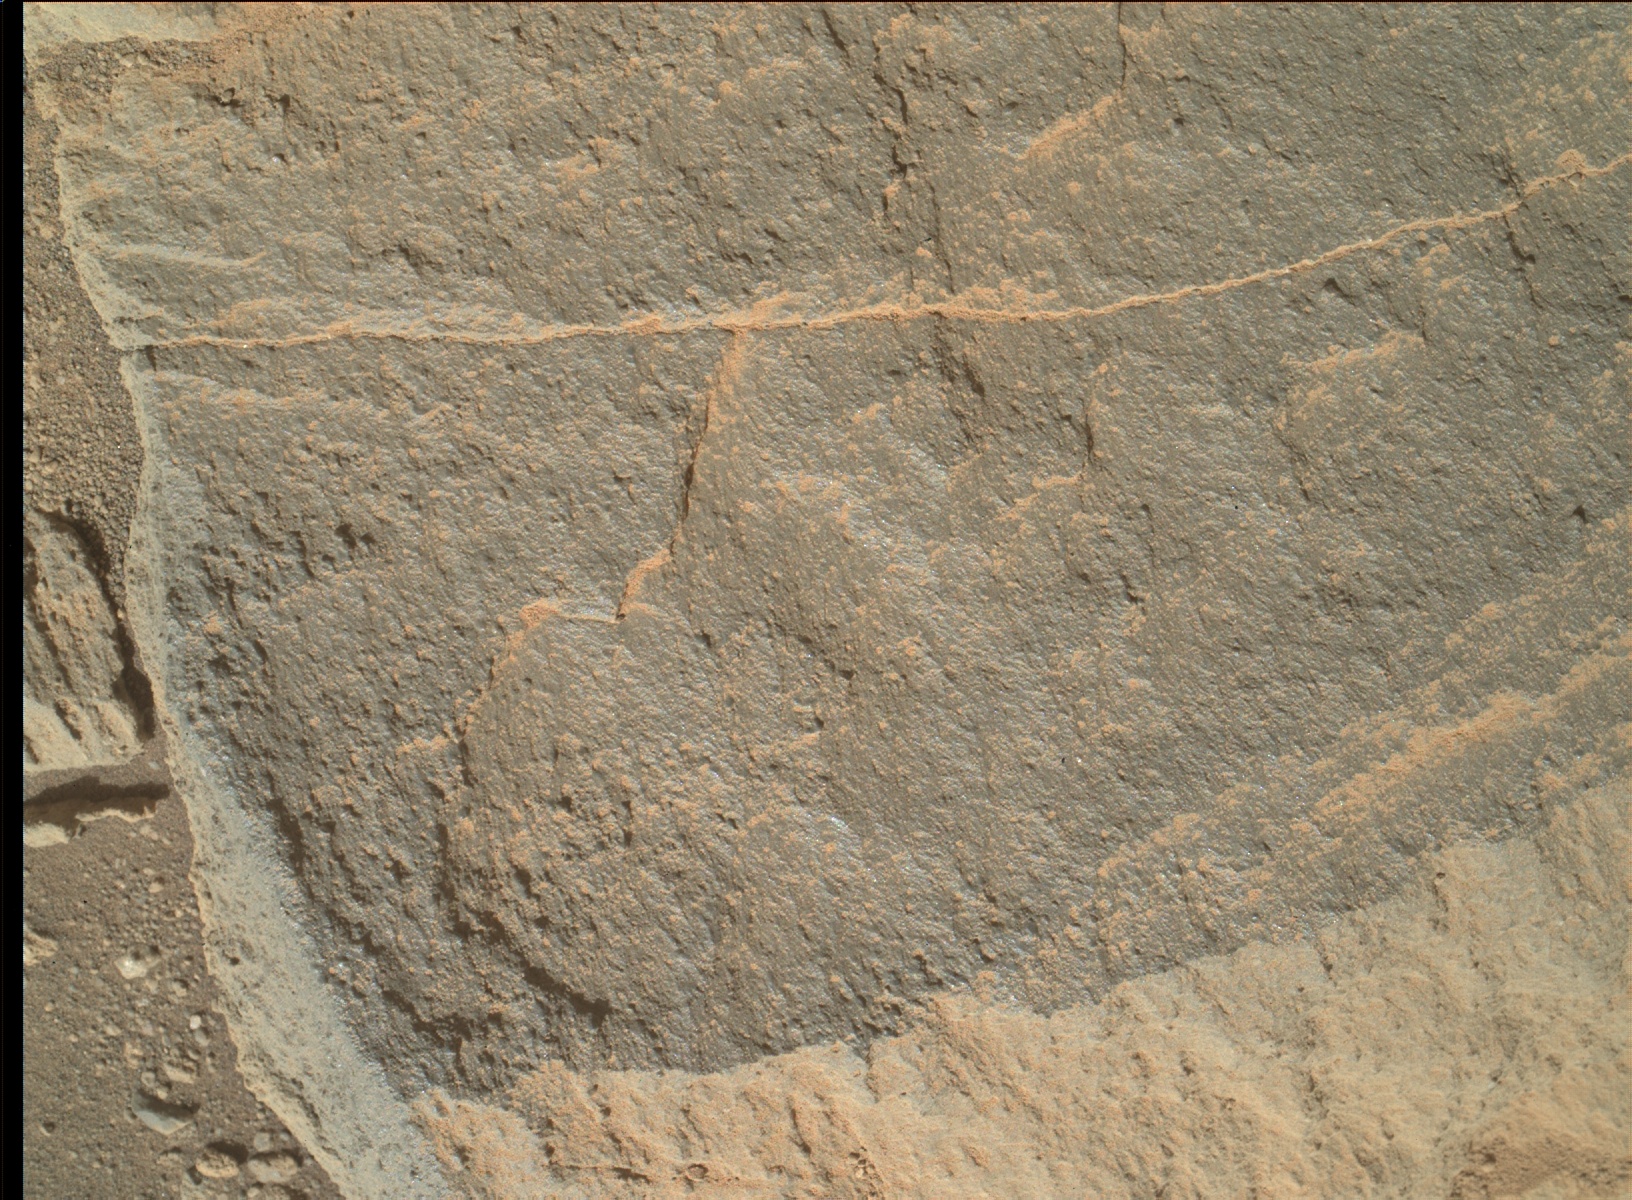 Nasa's Mars rover Curiosity acquired this image using its Mars Hand Lens Imager (MAHLI) on Sol 1102